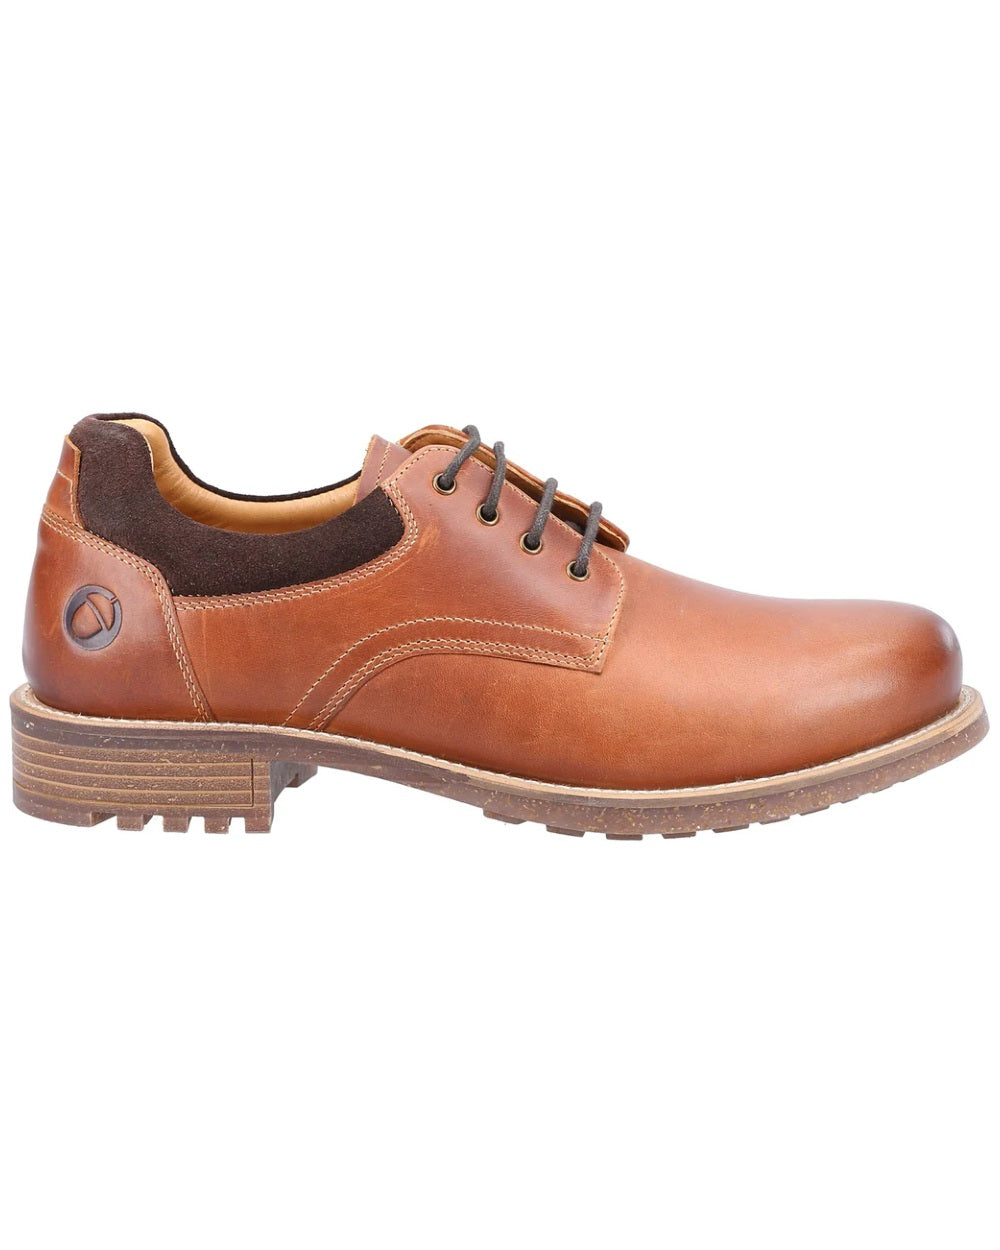 Cotswold Shipton Shoes in Tan